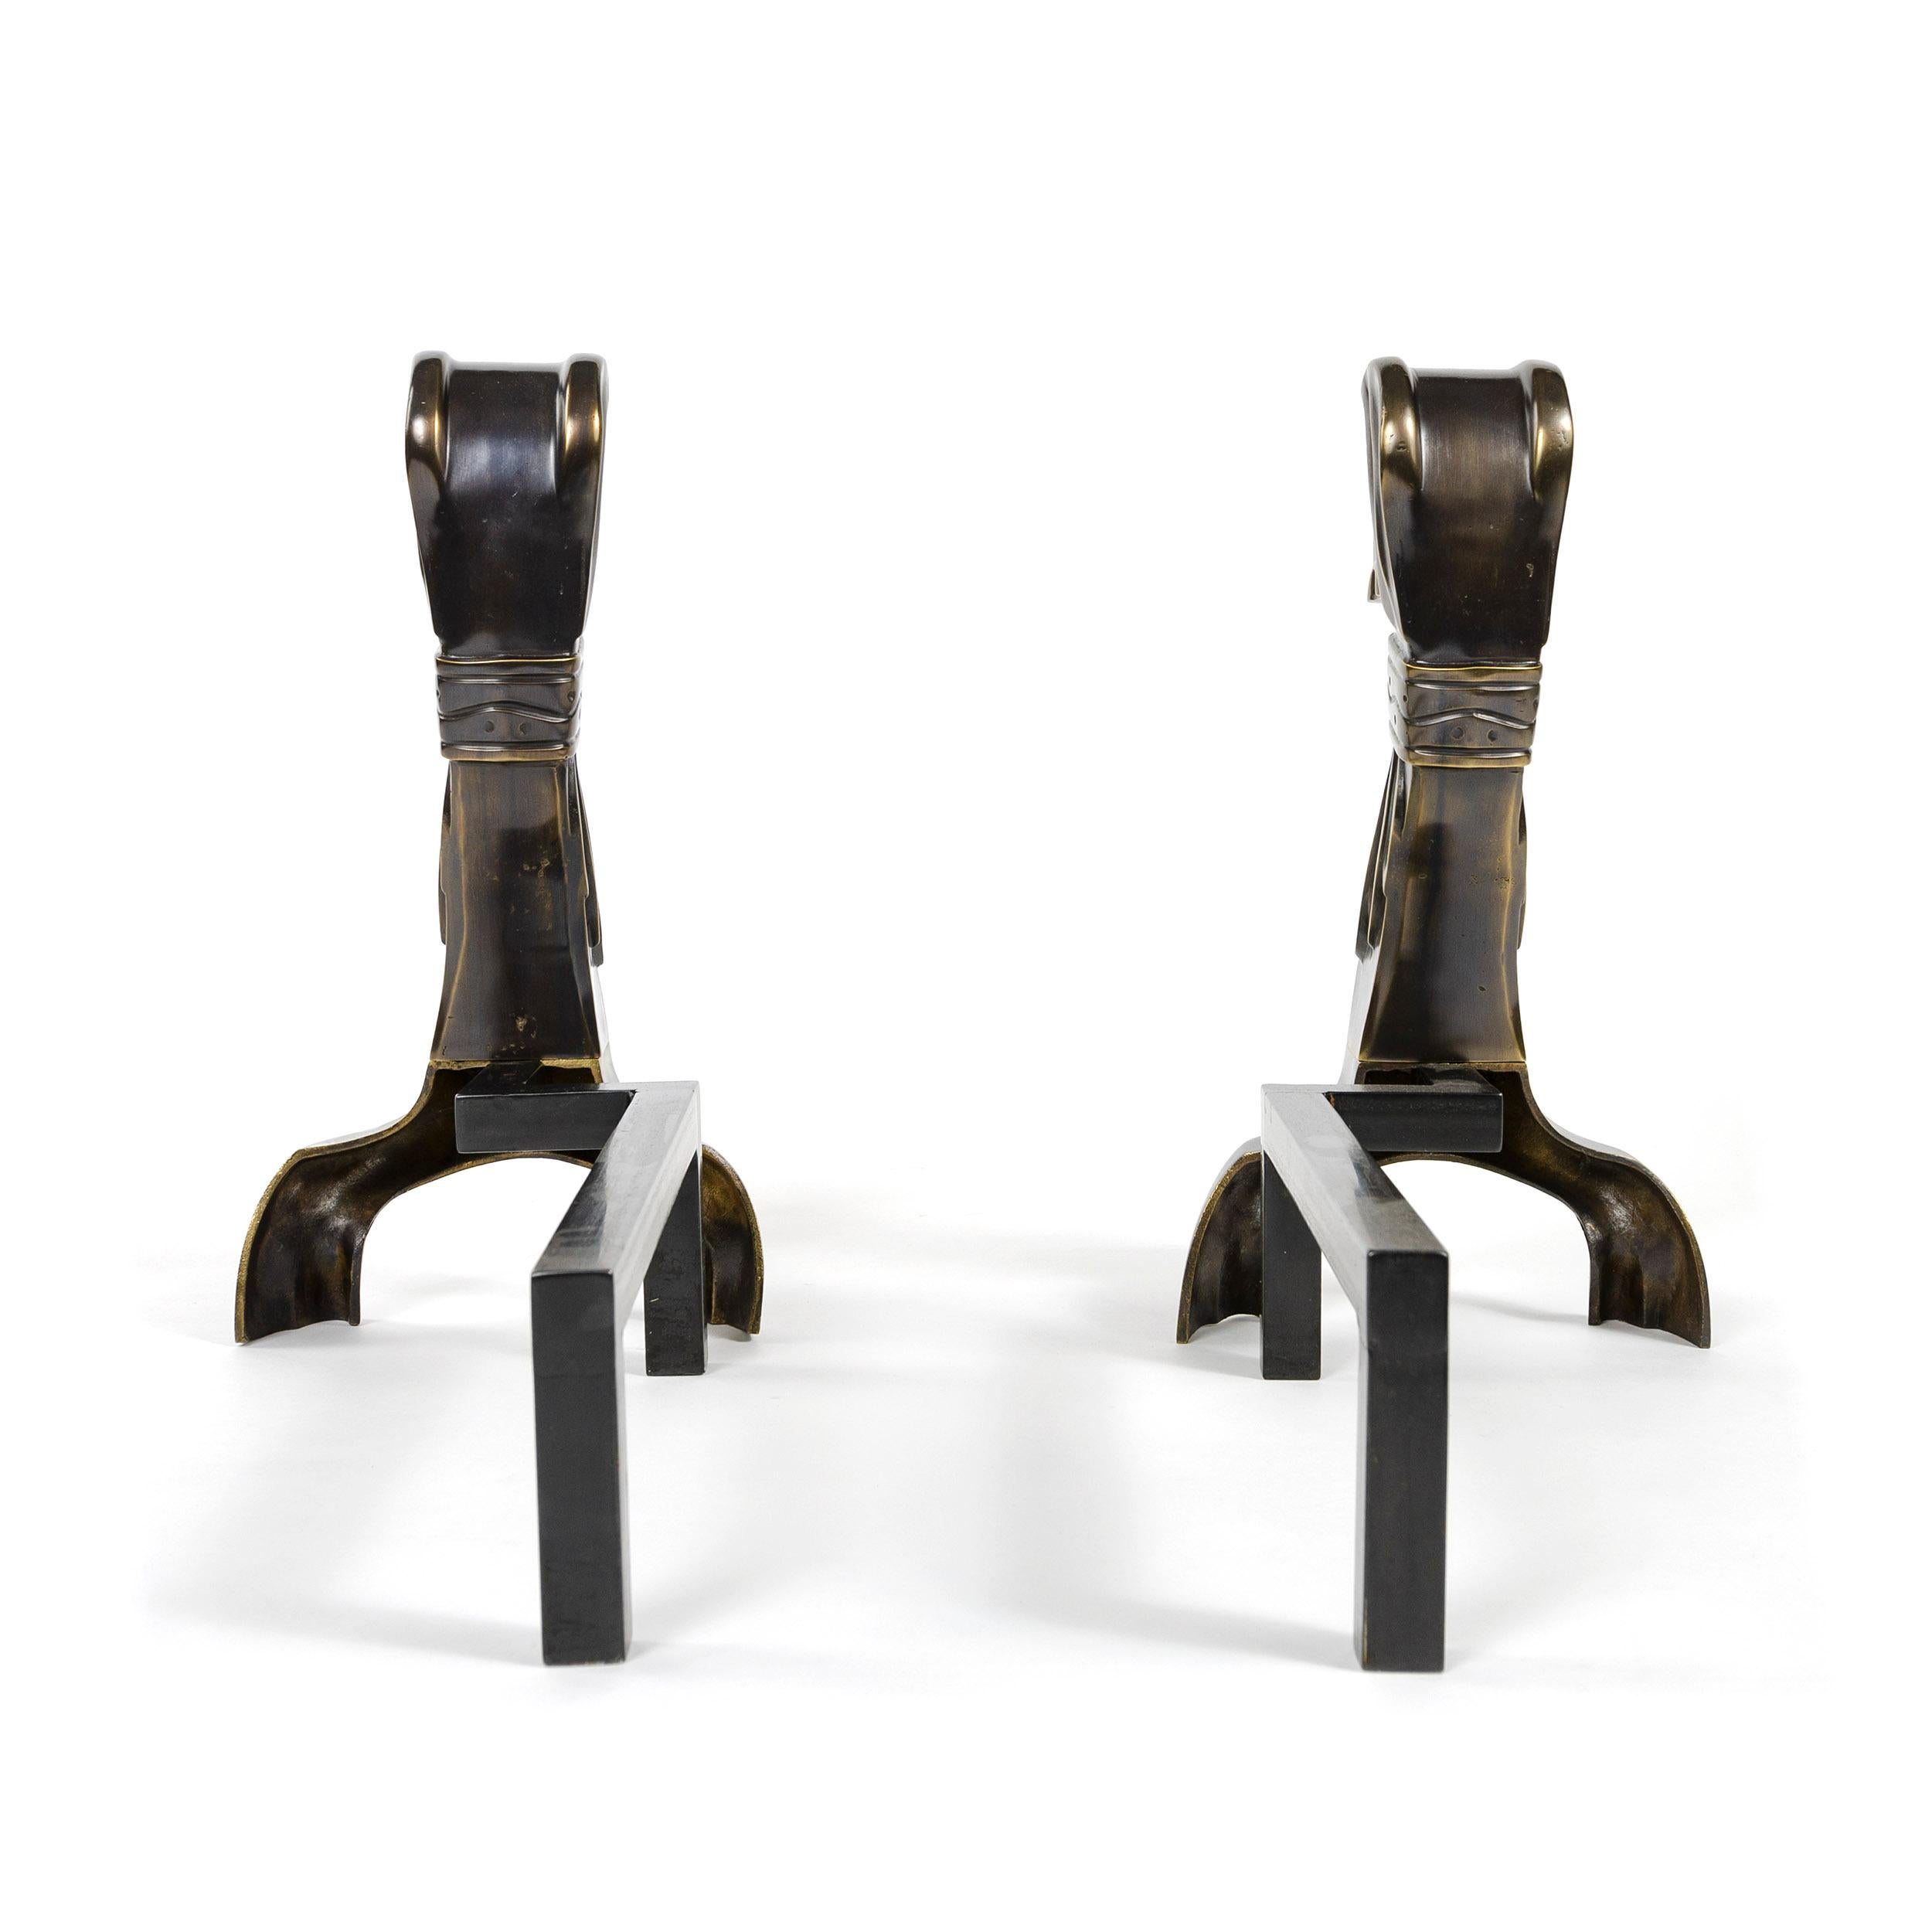 Mid-20th Century Dachshund Andirons For Sale